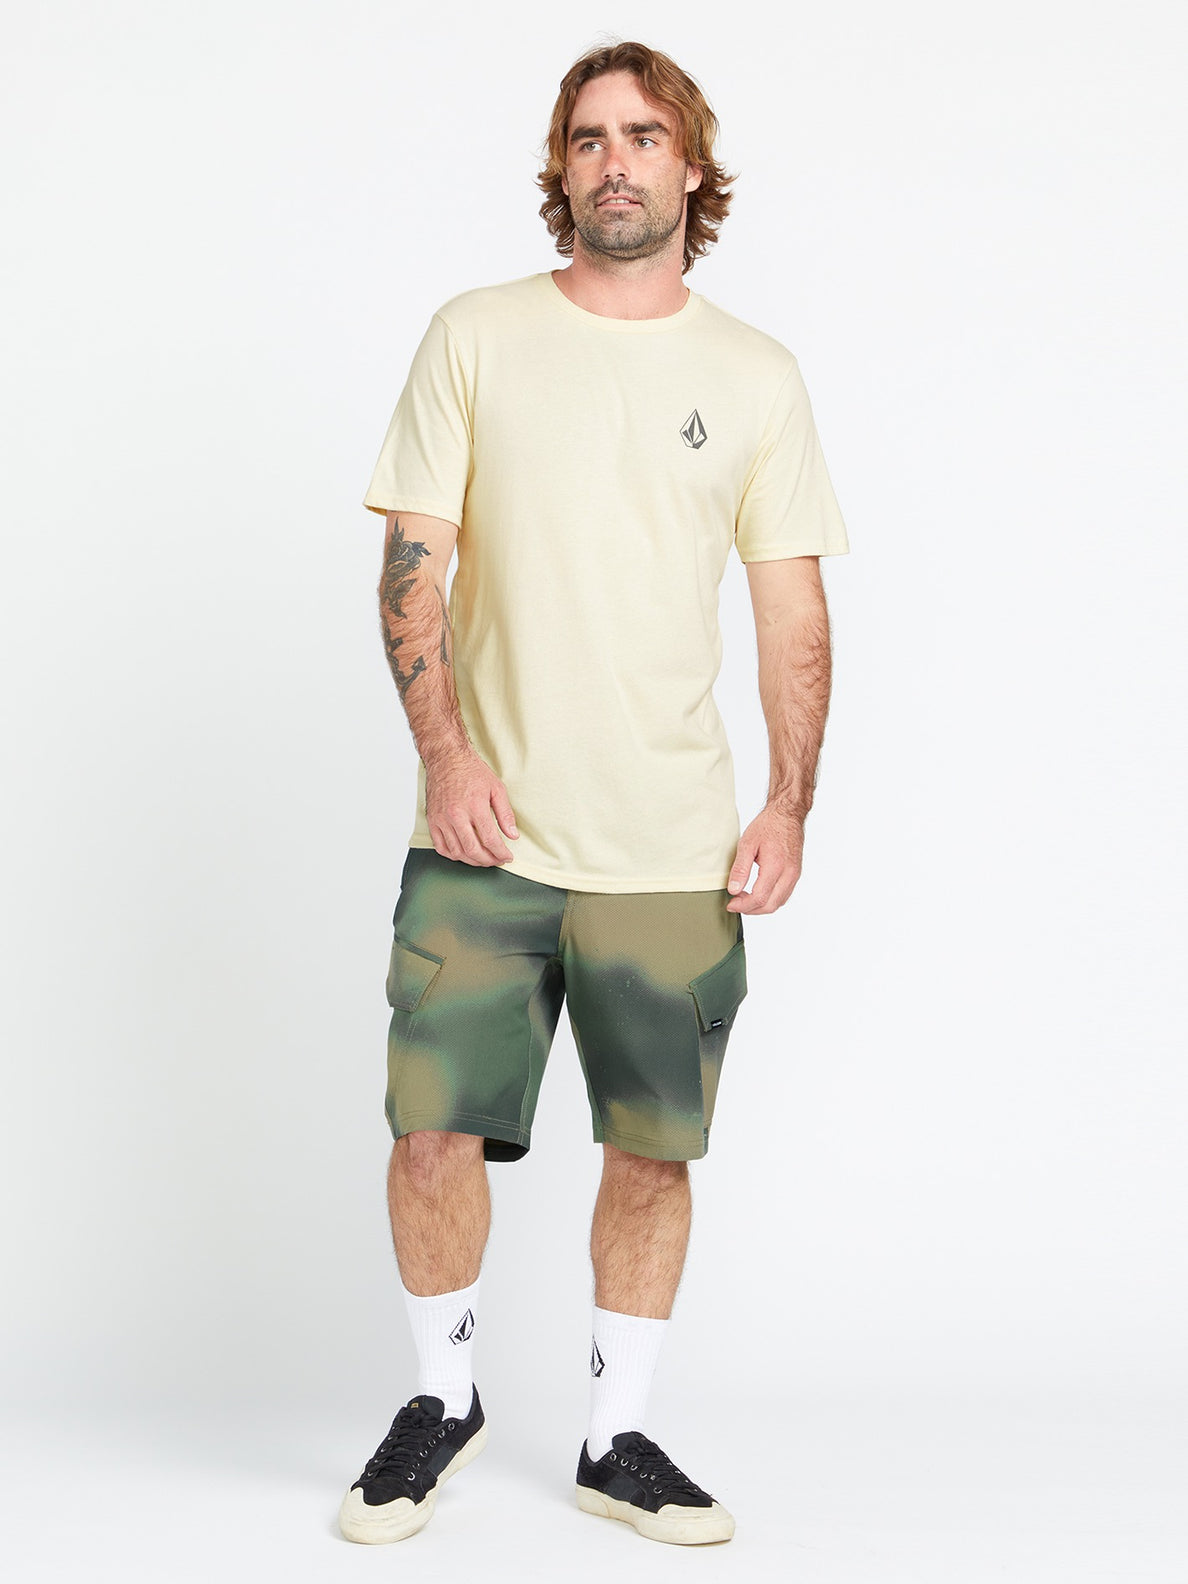 Country Days Hybrid Shorts - Camouflage